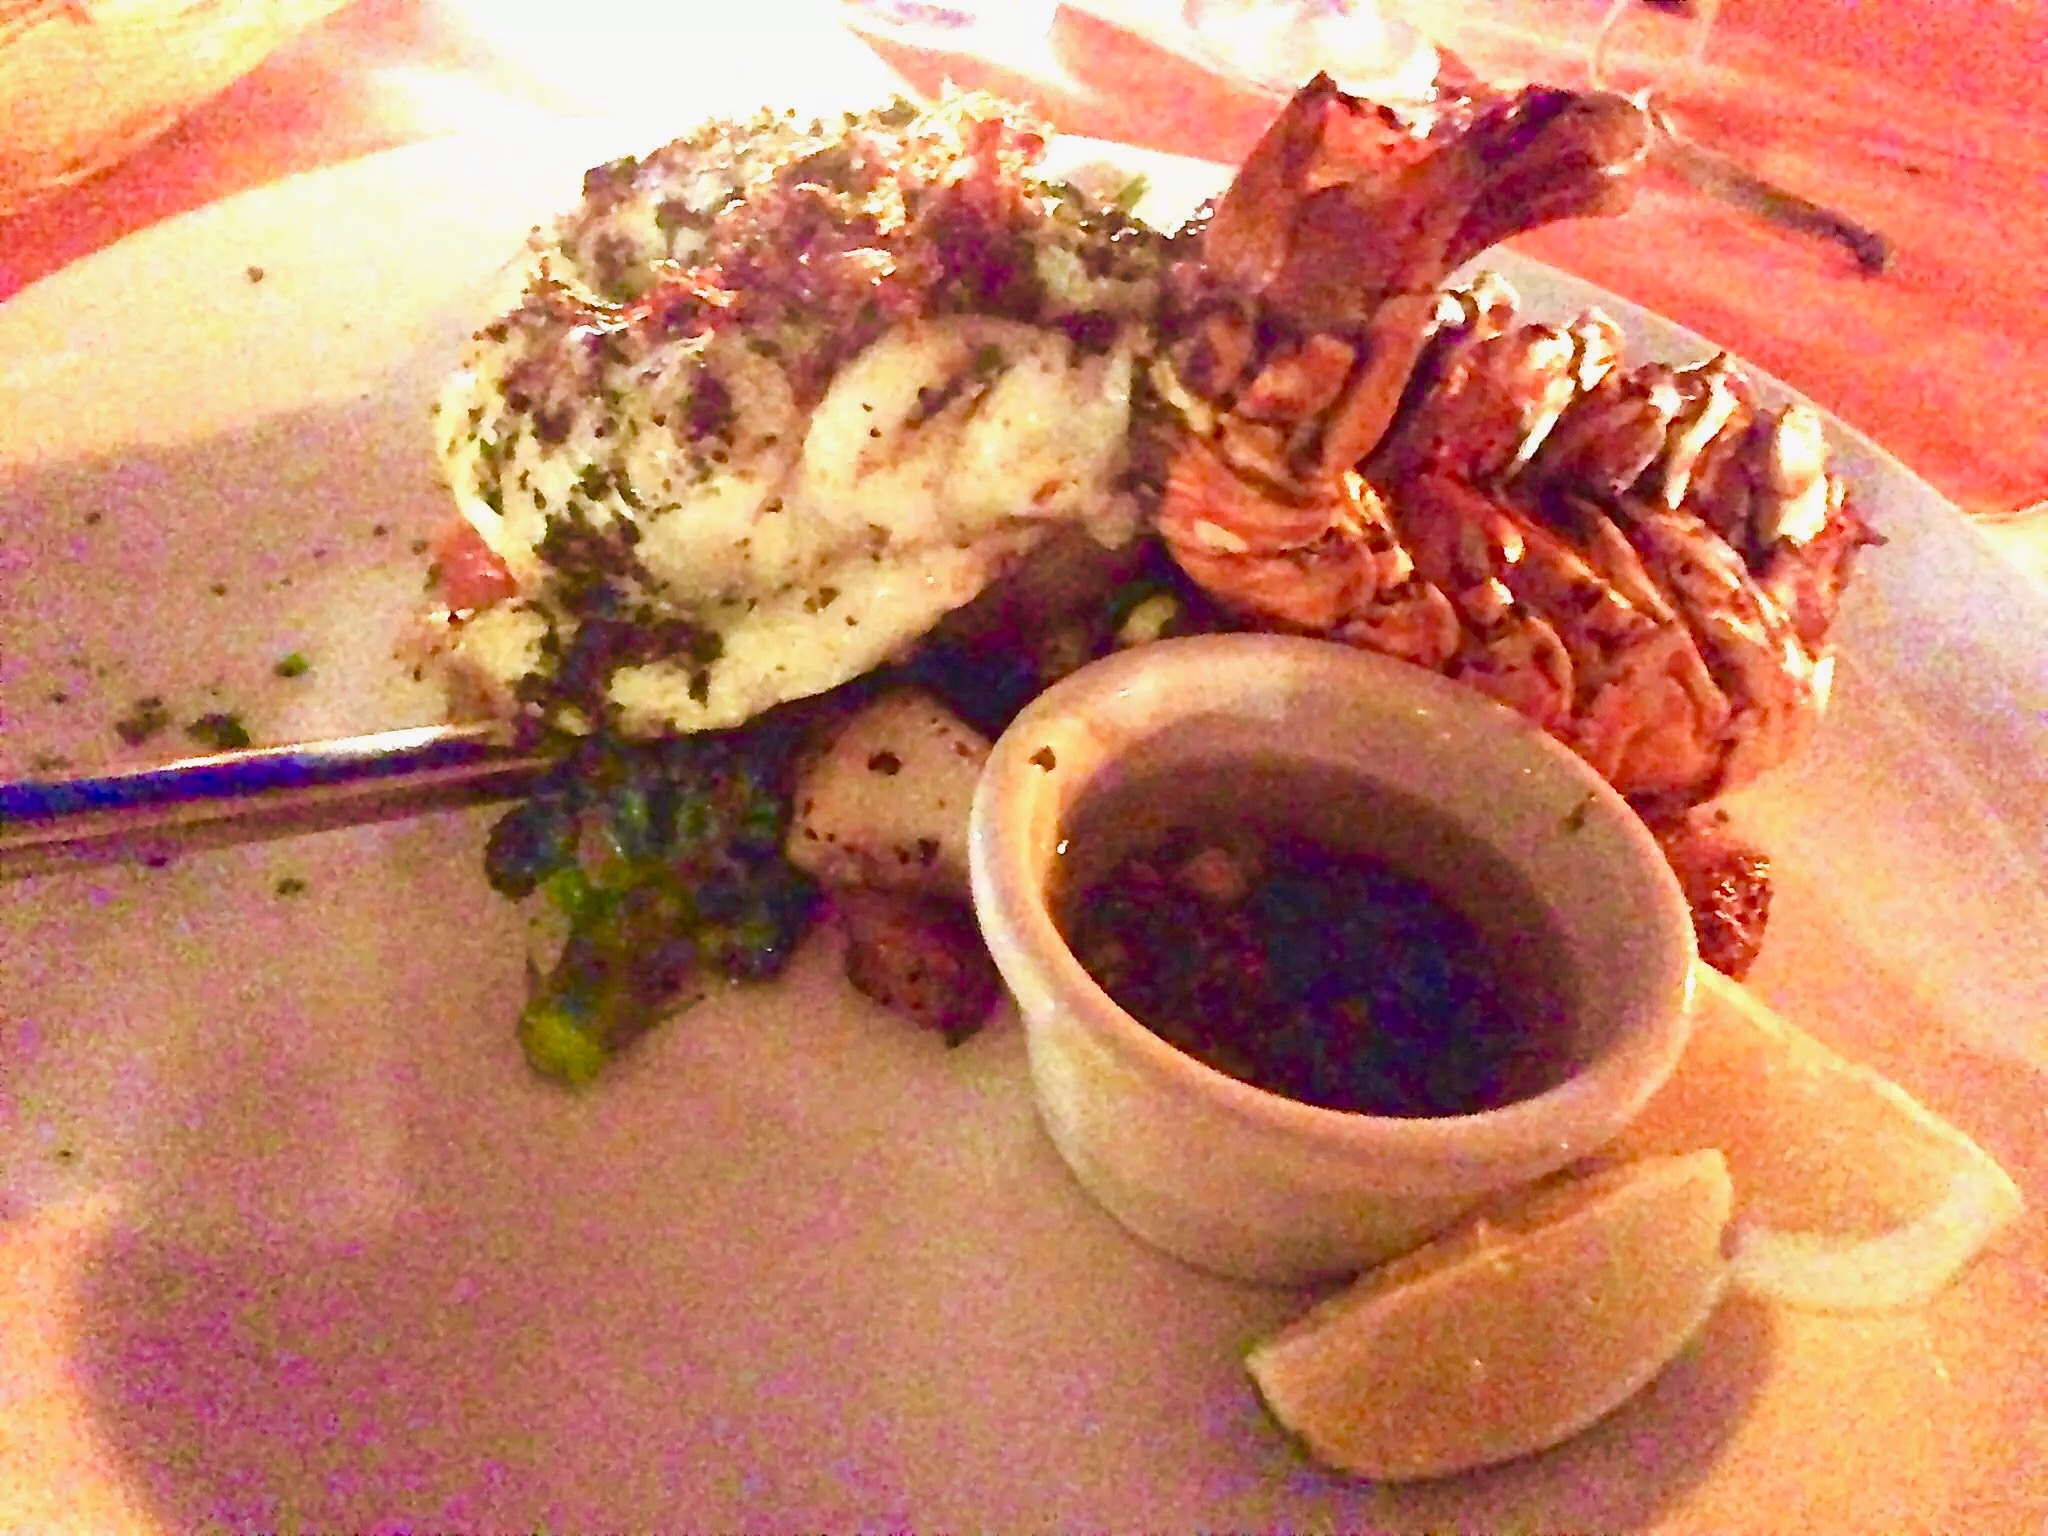 Char-Grilled Lobster Tail with Garlic Butter Sauce